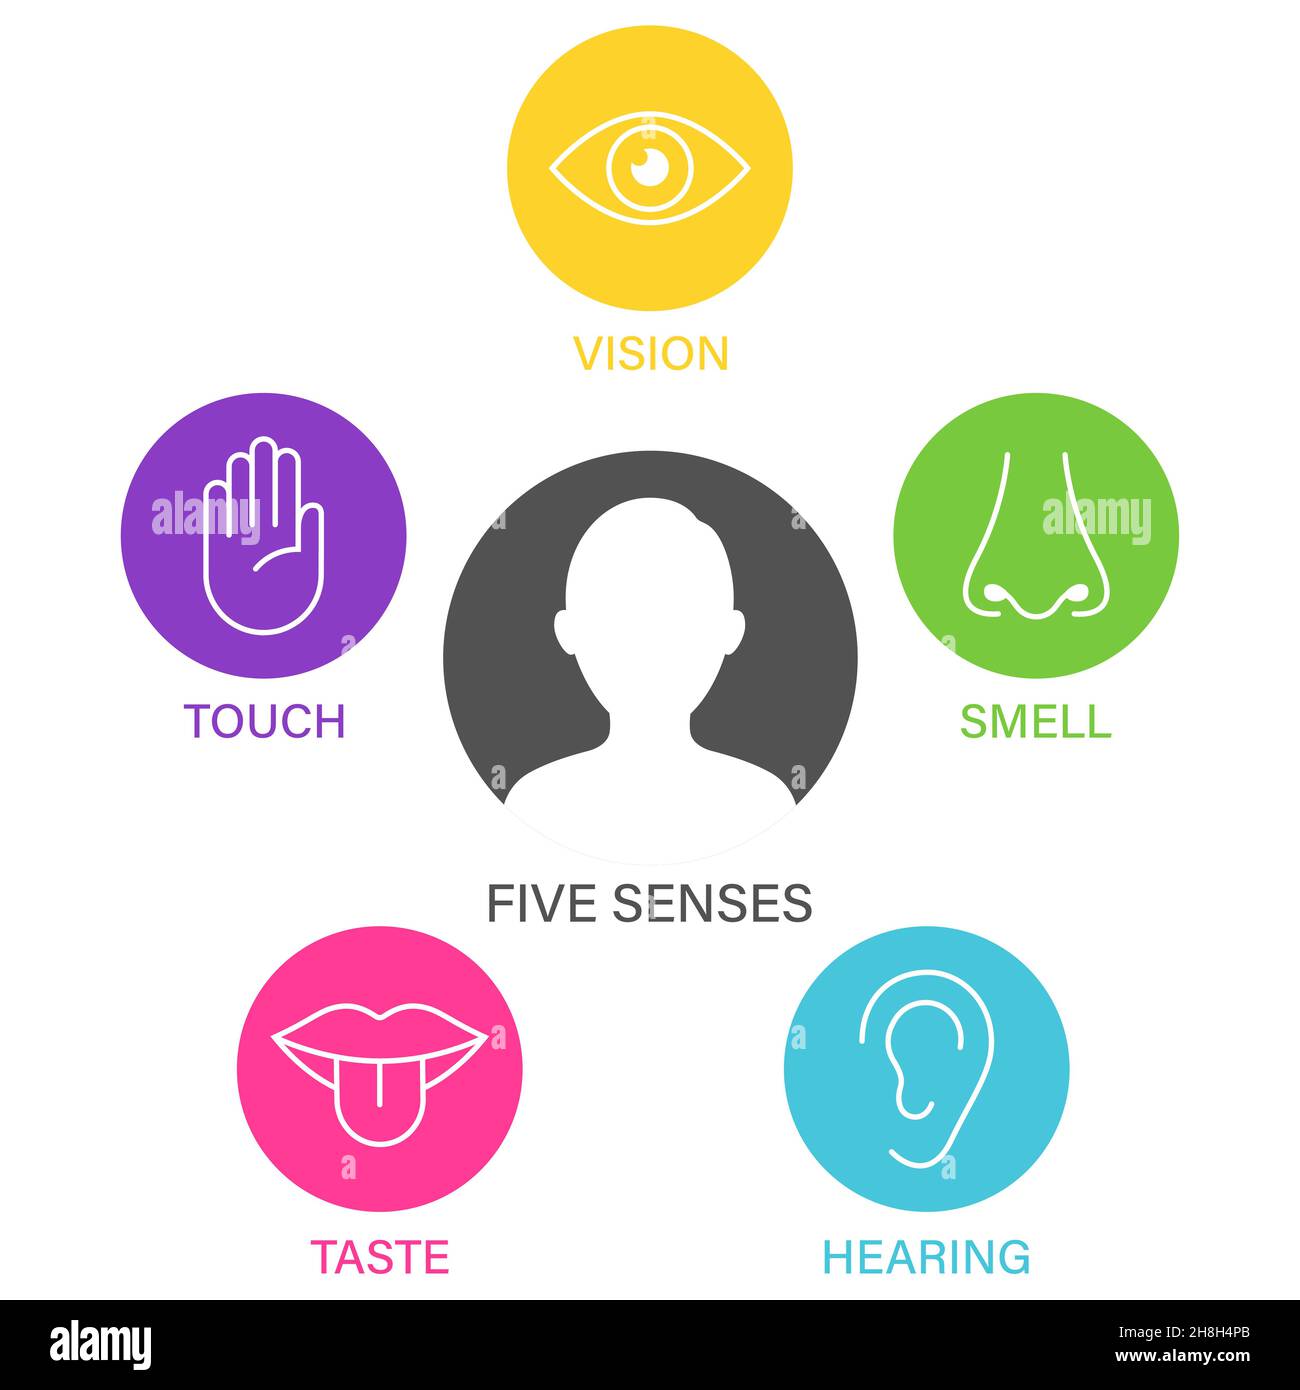 Five senses of human nervous system icon vector illustration, Simple ...